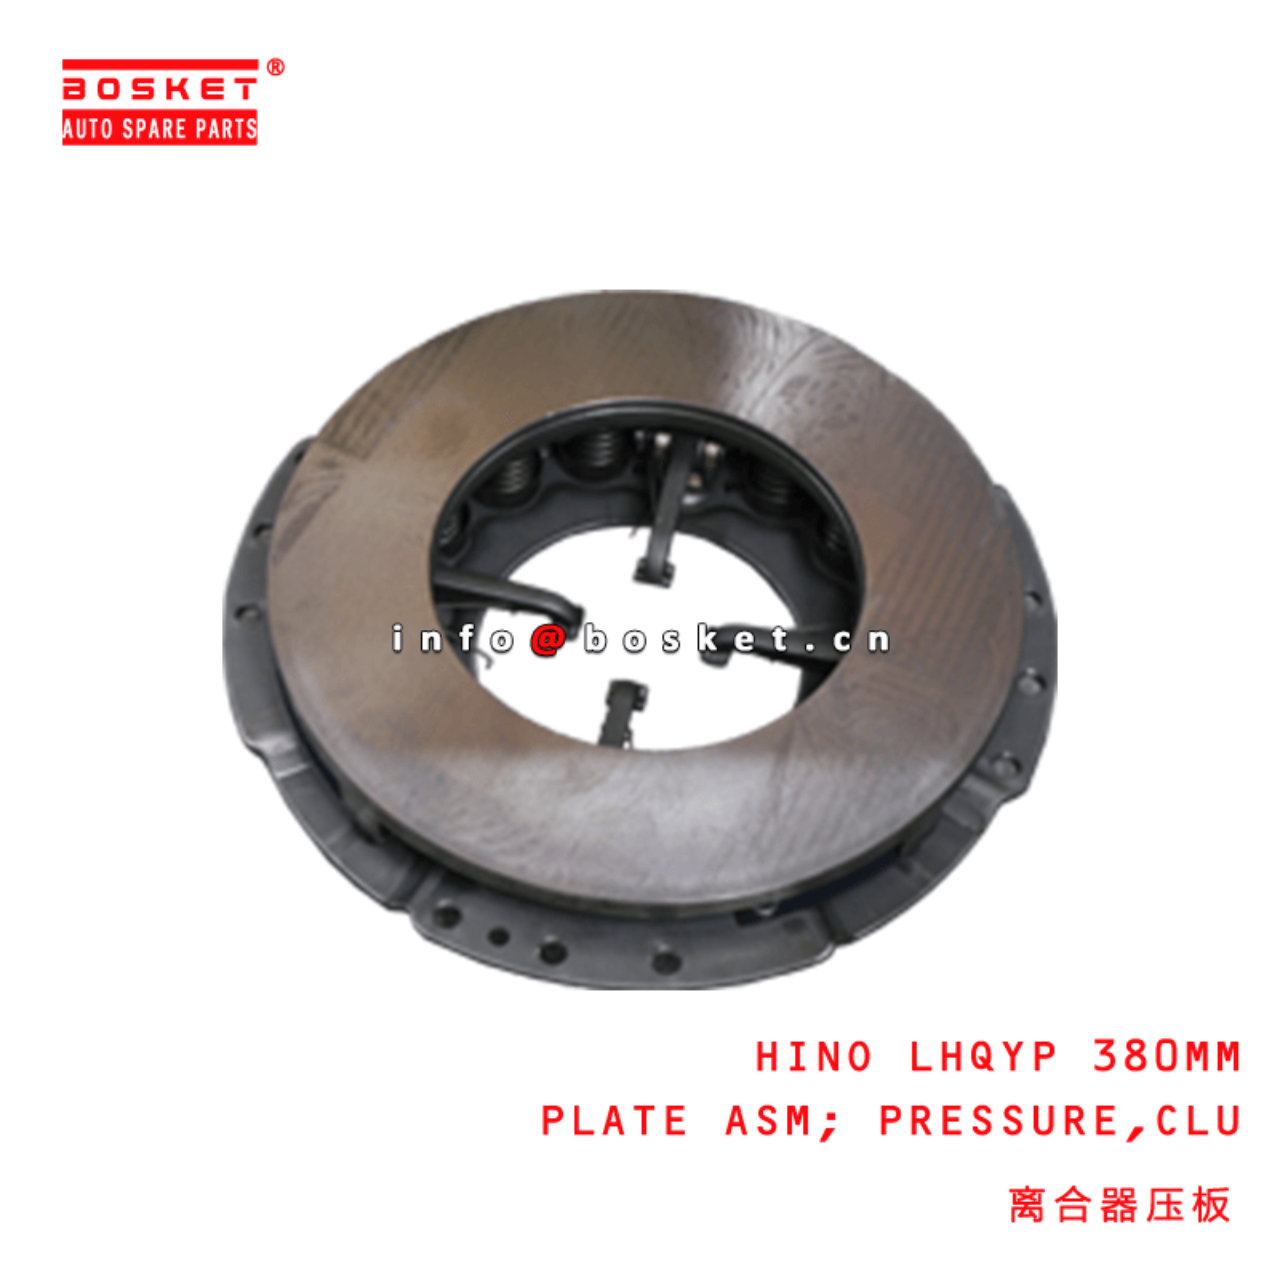 HINO LHQYP 380MM Clutch Pressure Plate Assembly Suitable For HINO 